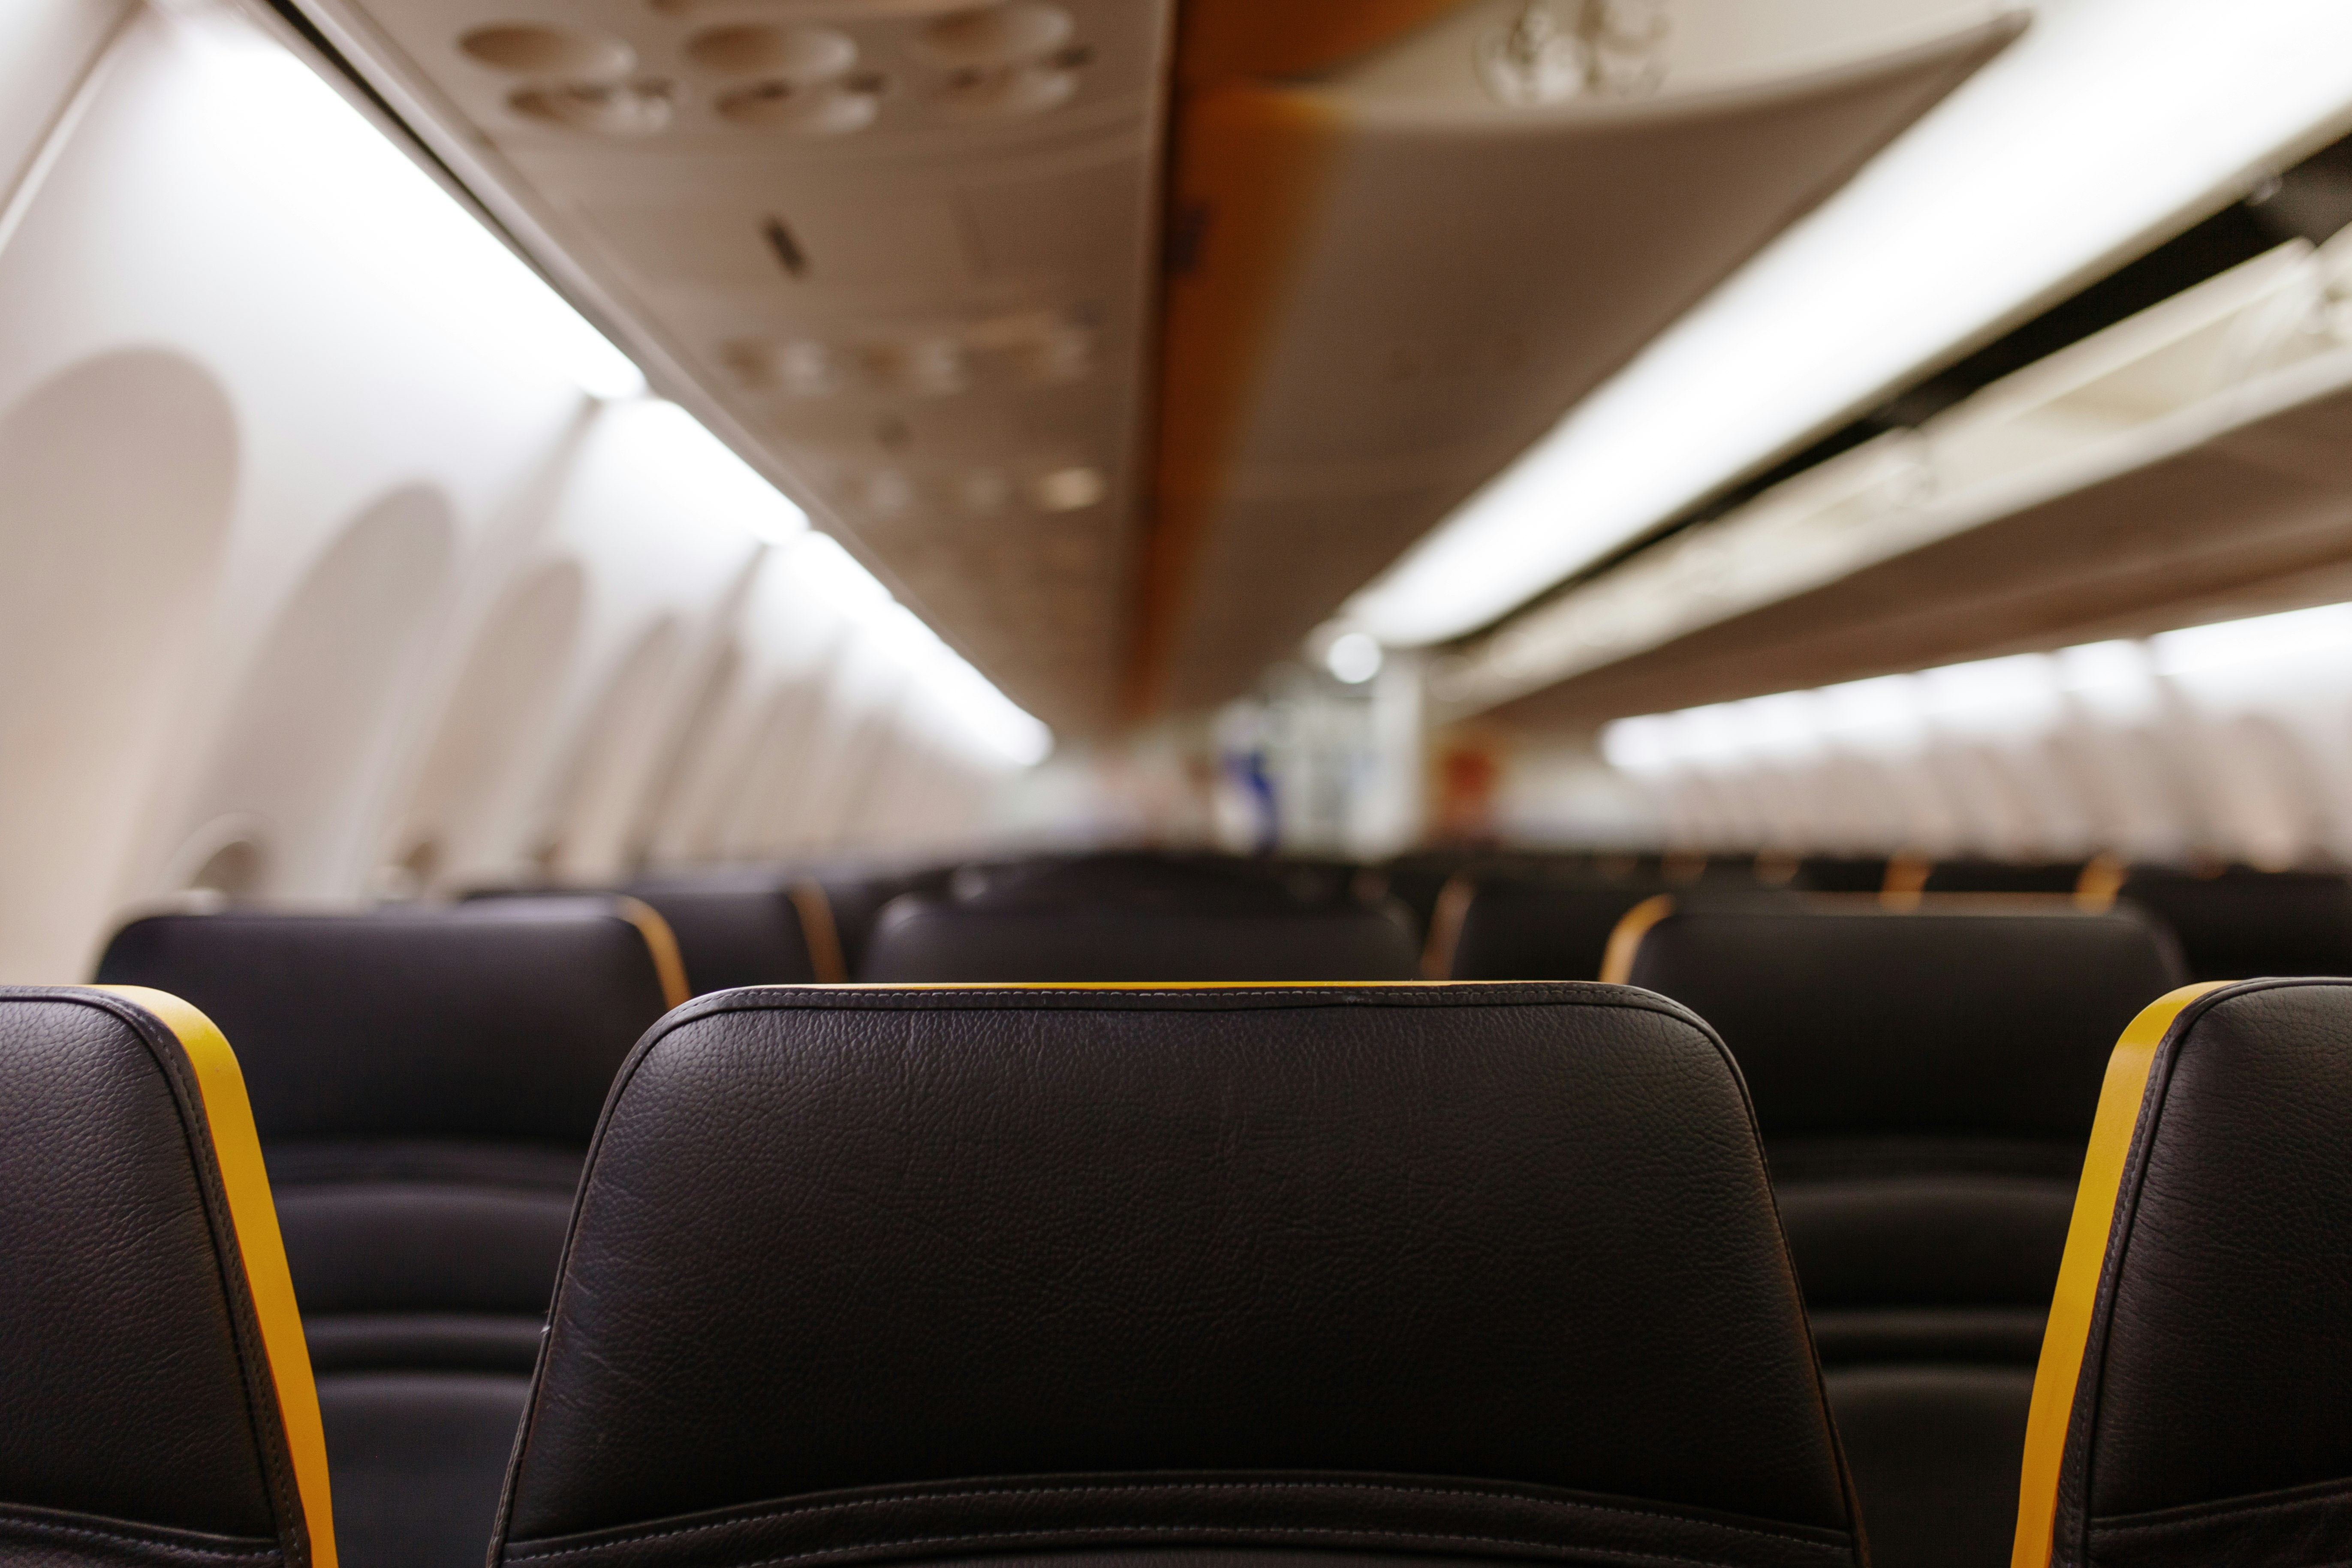 The view from the middle of a row of plane seats. The chair in front is in focus, while the rest of the plane is blurry.